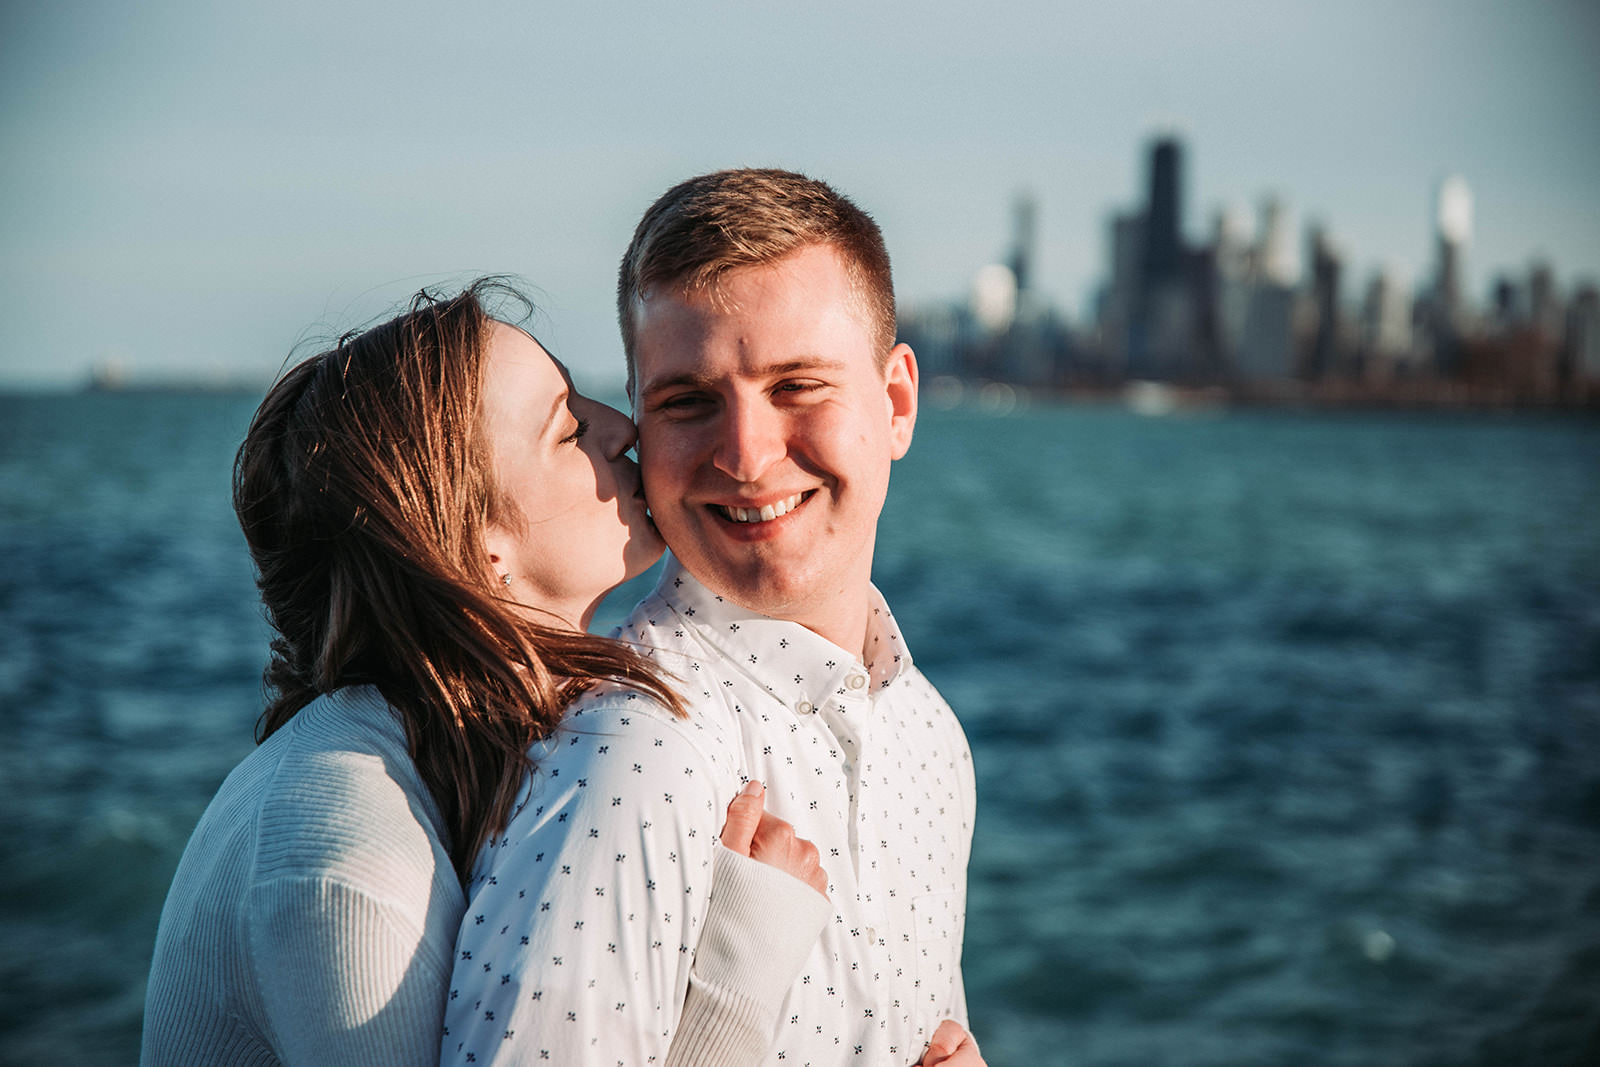 Downtown_chicago_spring_engagement_session-25.jpg